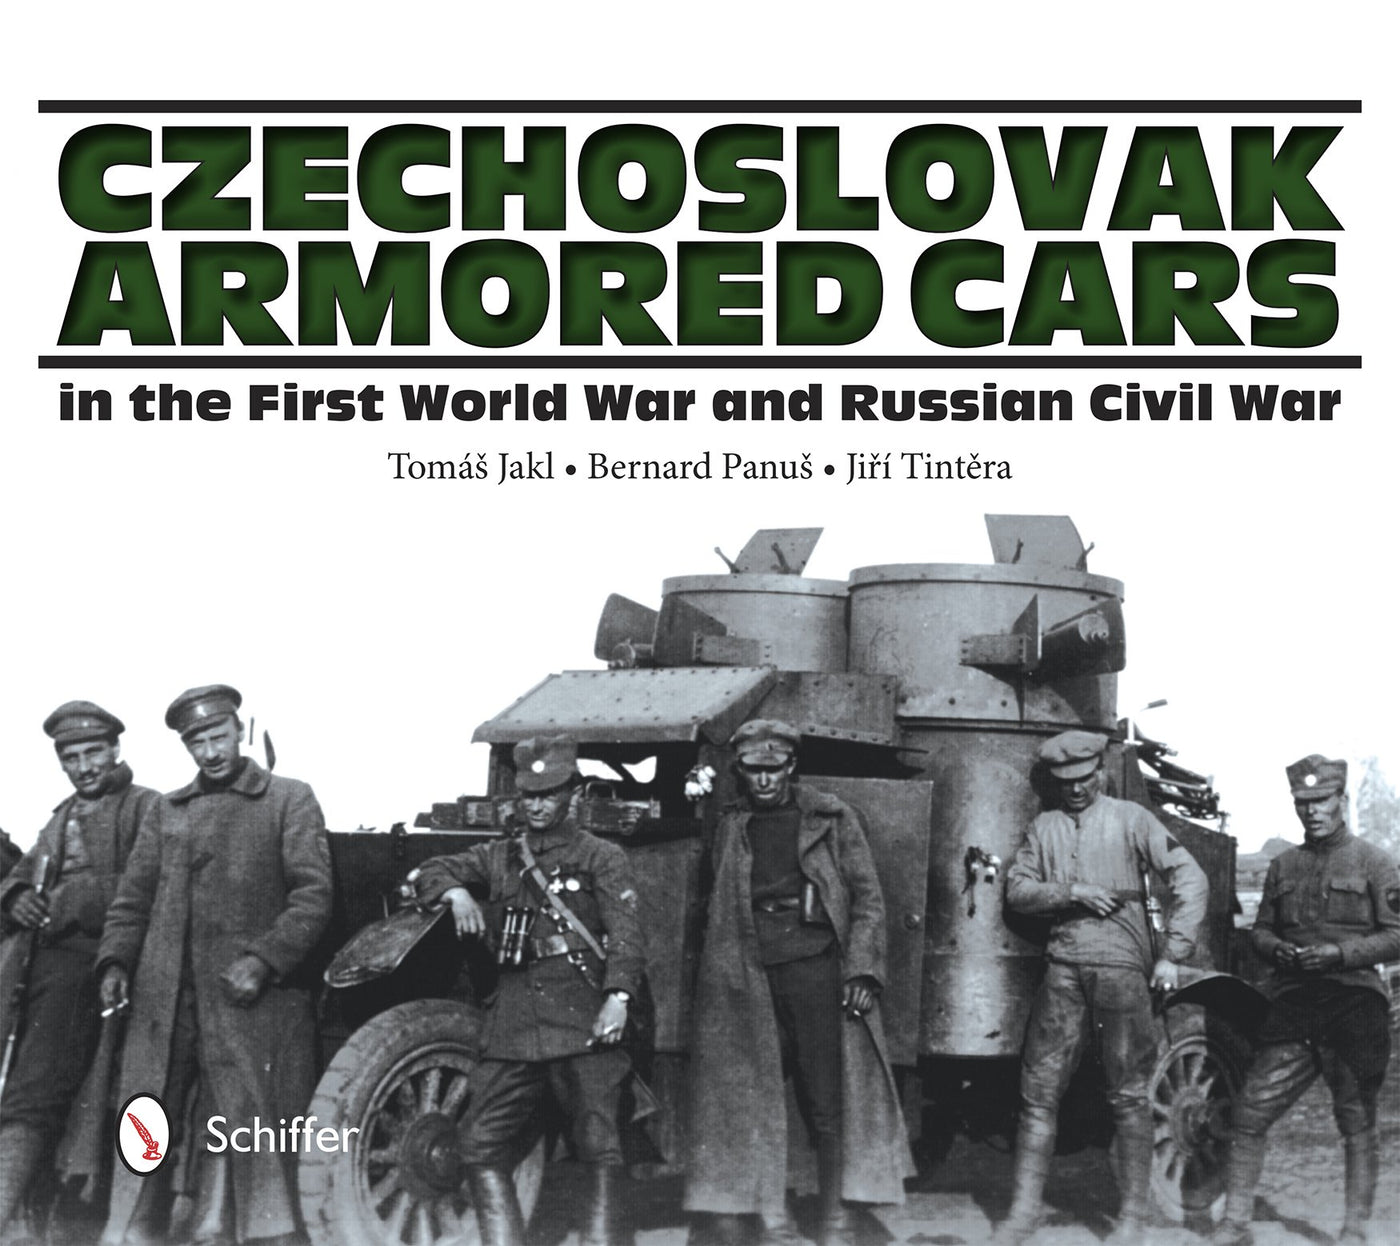 Czechoslovak Armored Cars in the First World War